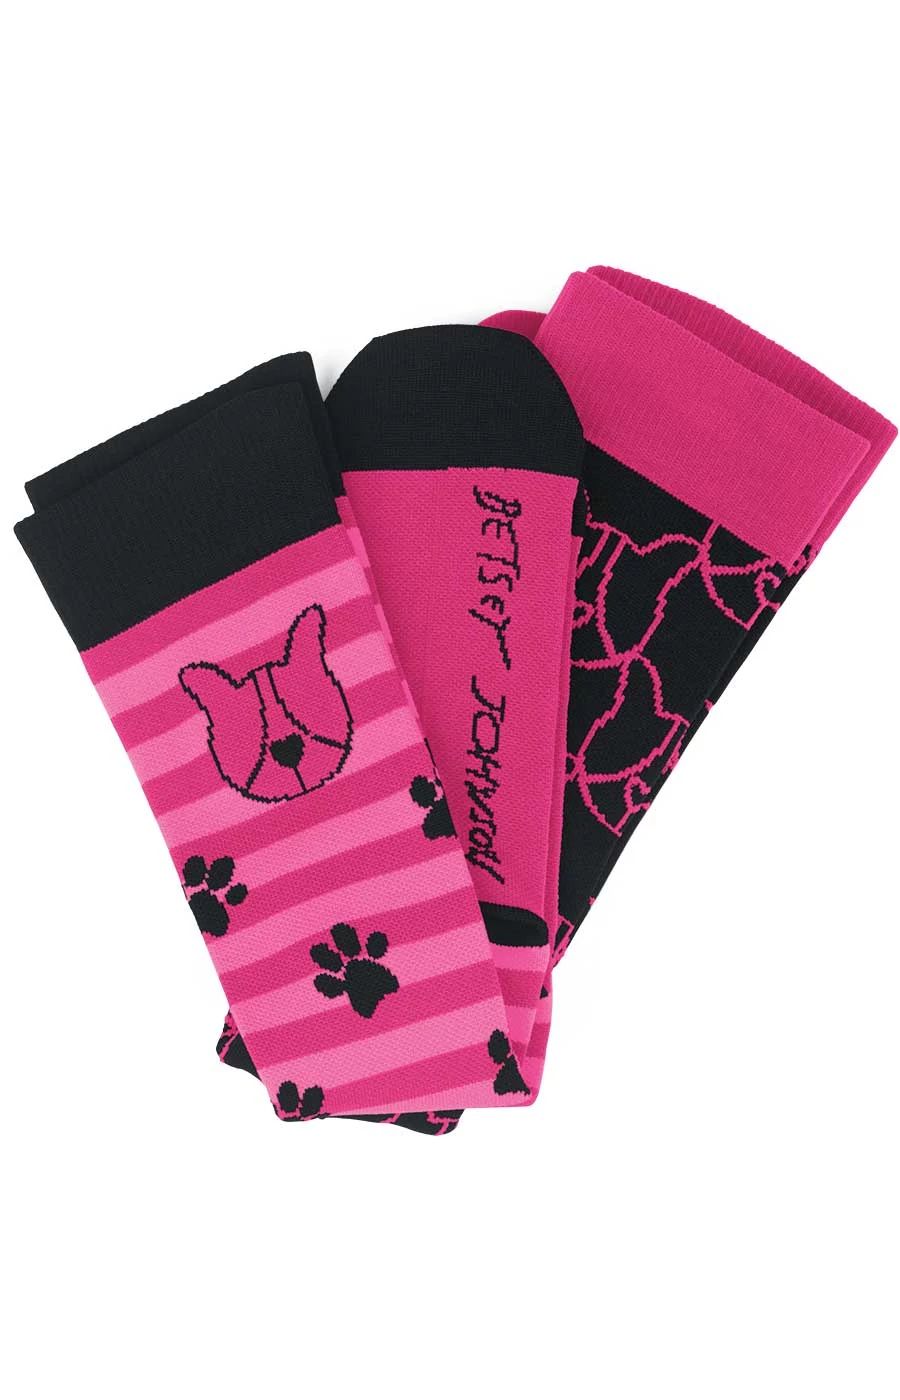 Koi Compression Socks - Betsey Puppy - 2 Pack